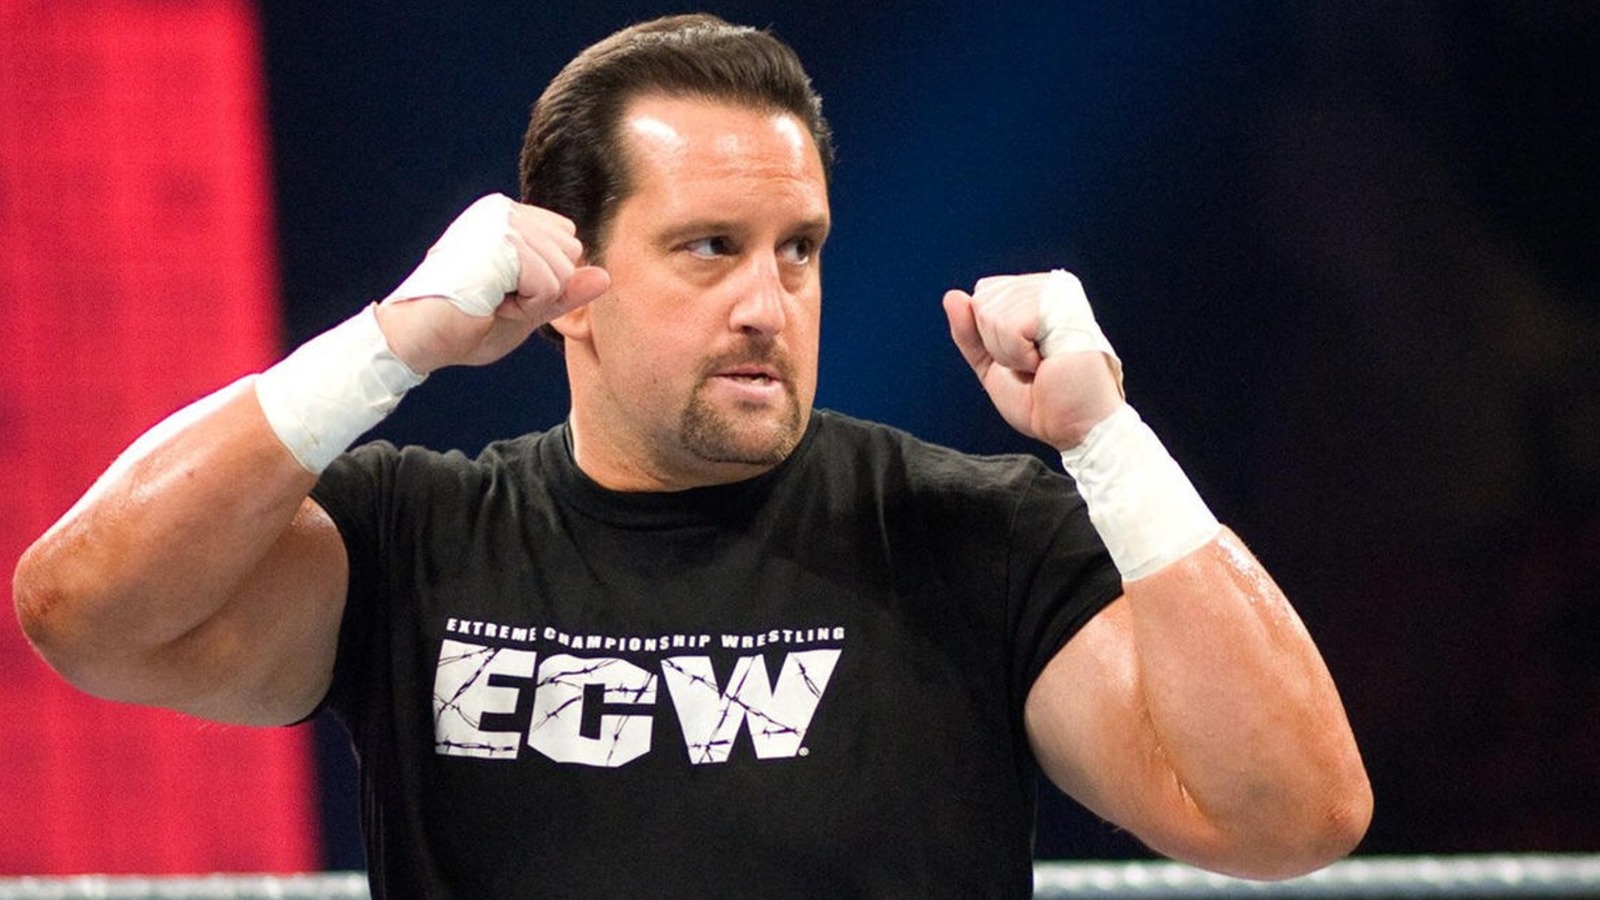 Tommy Dreamer Names Two ECW People He Thinks Should Be In WWE Hall Of Fame